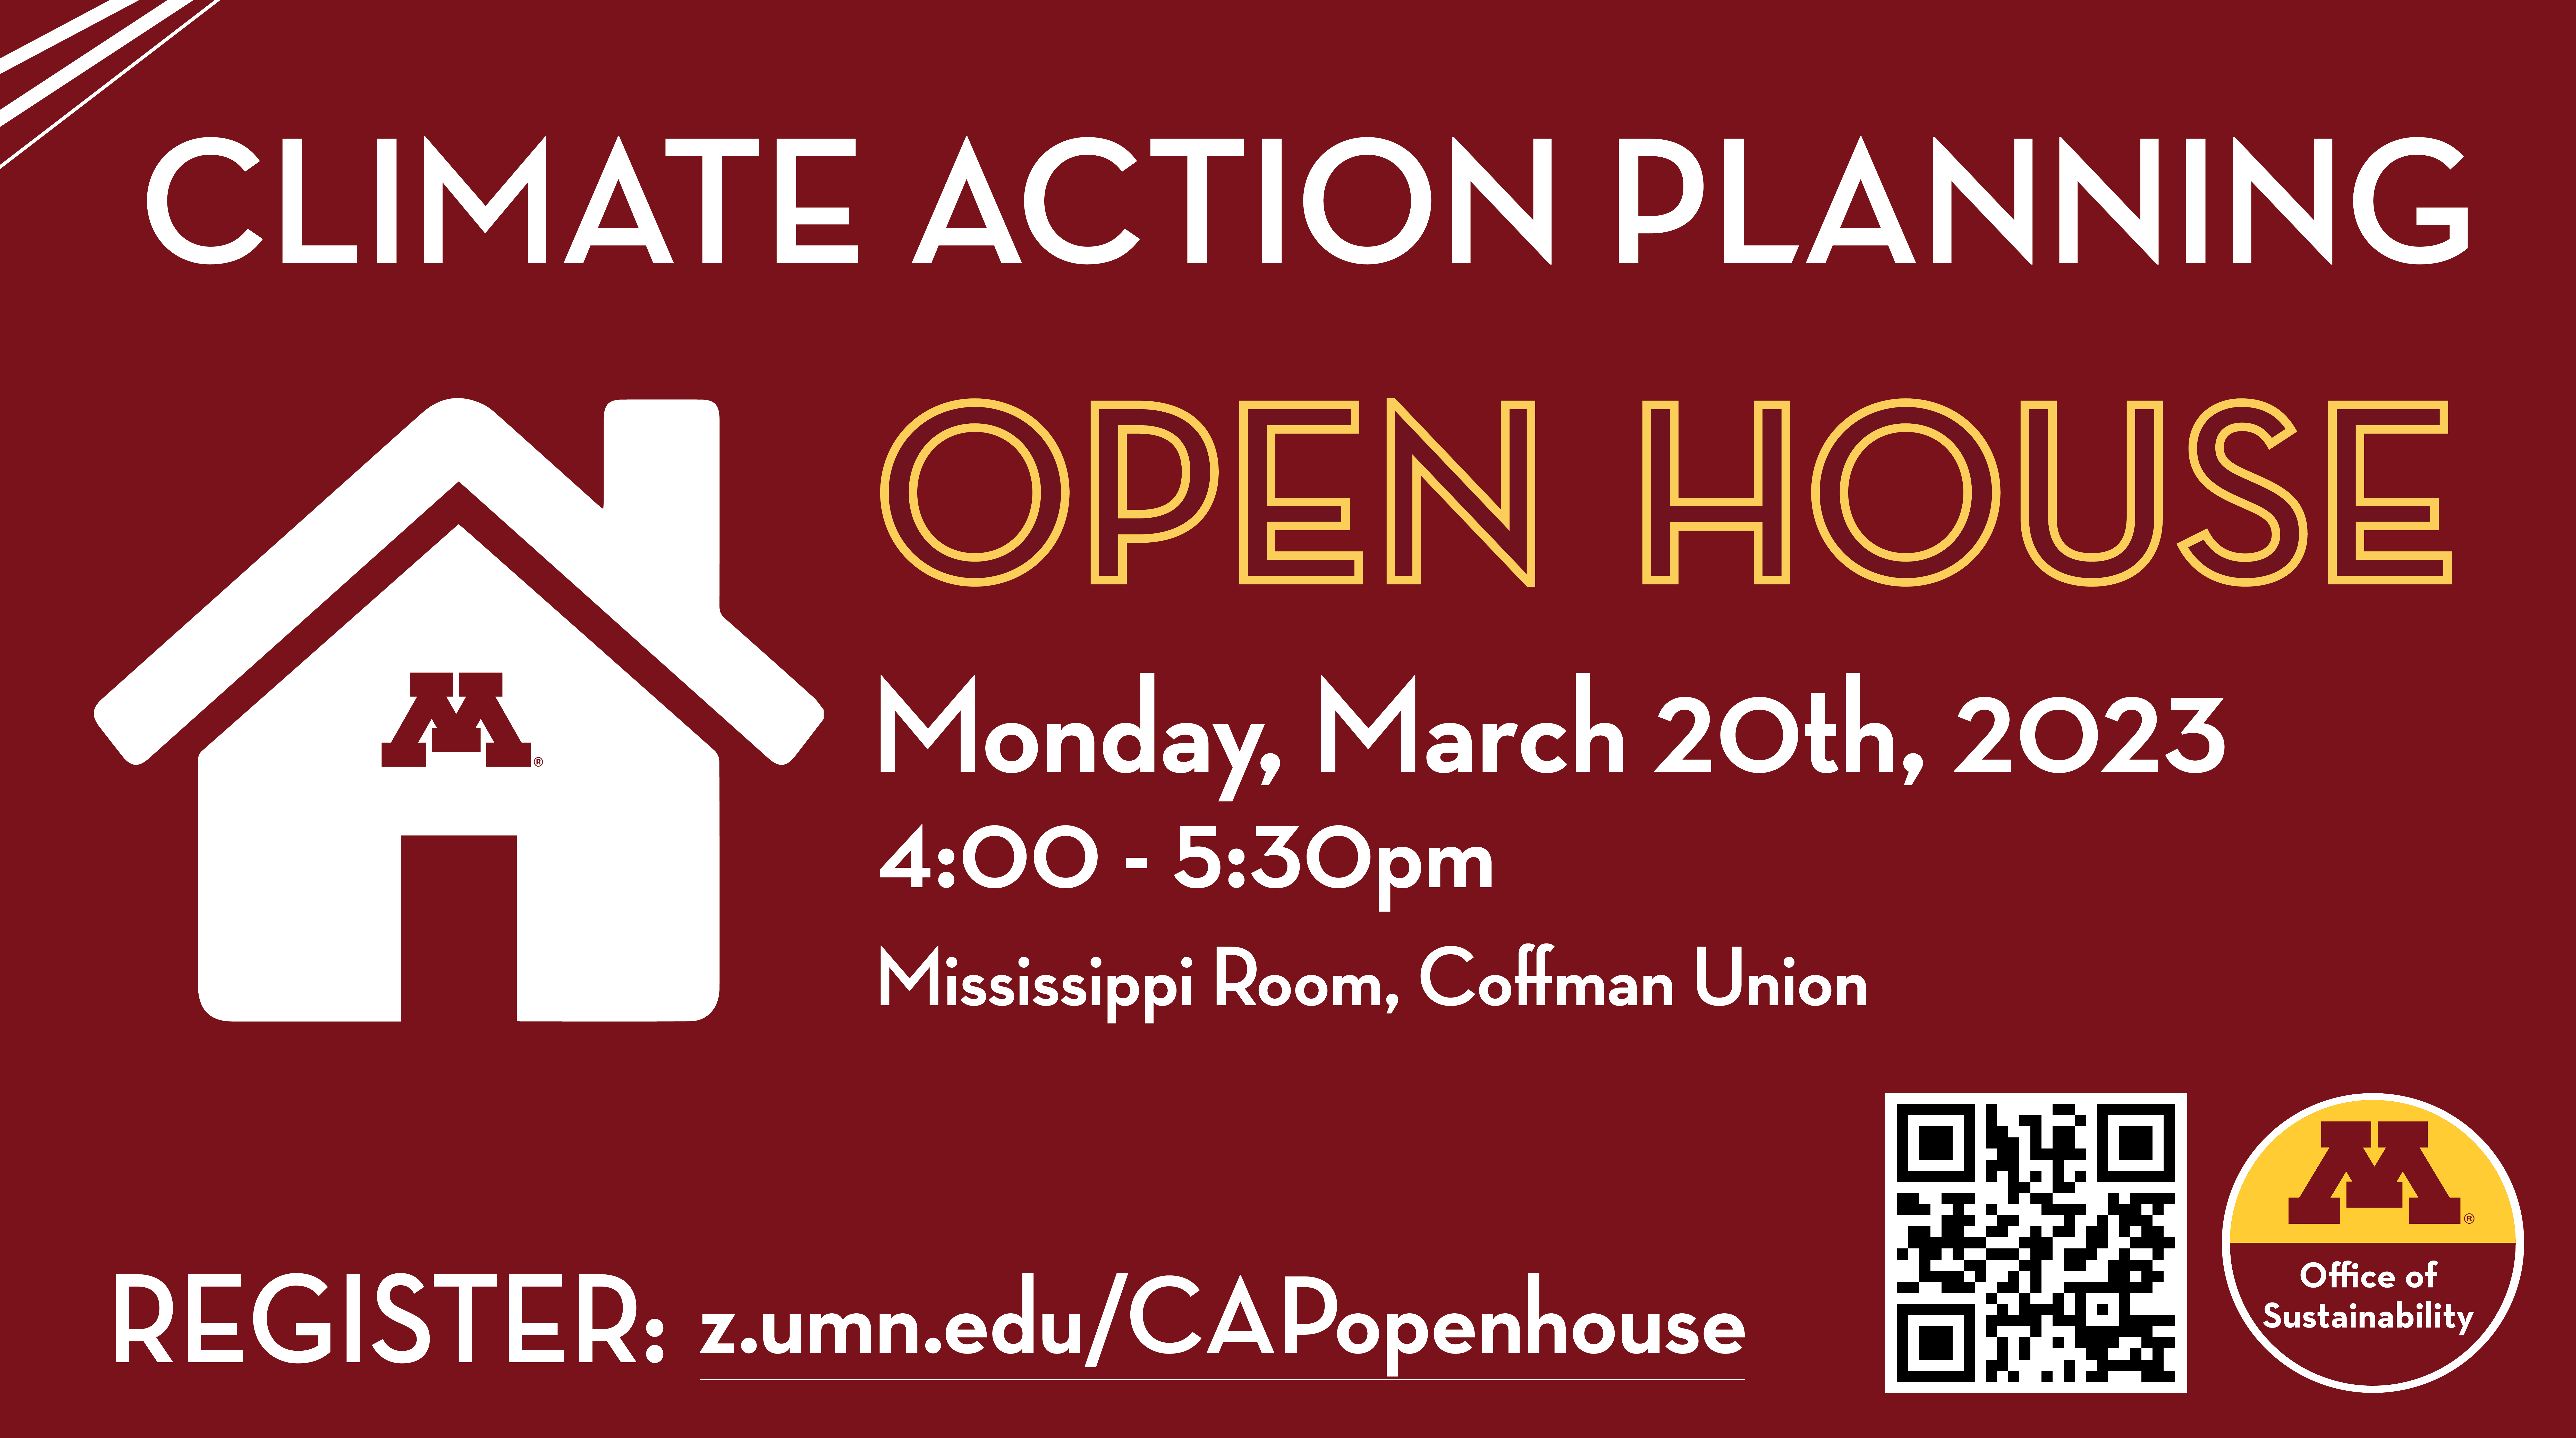 Climate Action Planning Open House Monday, March 20th, 2023